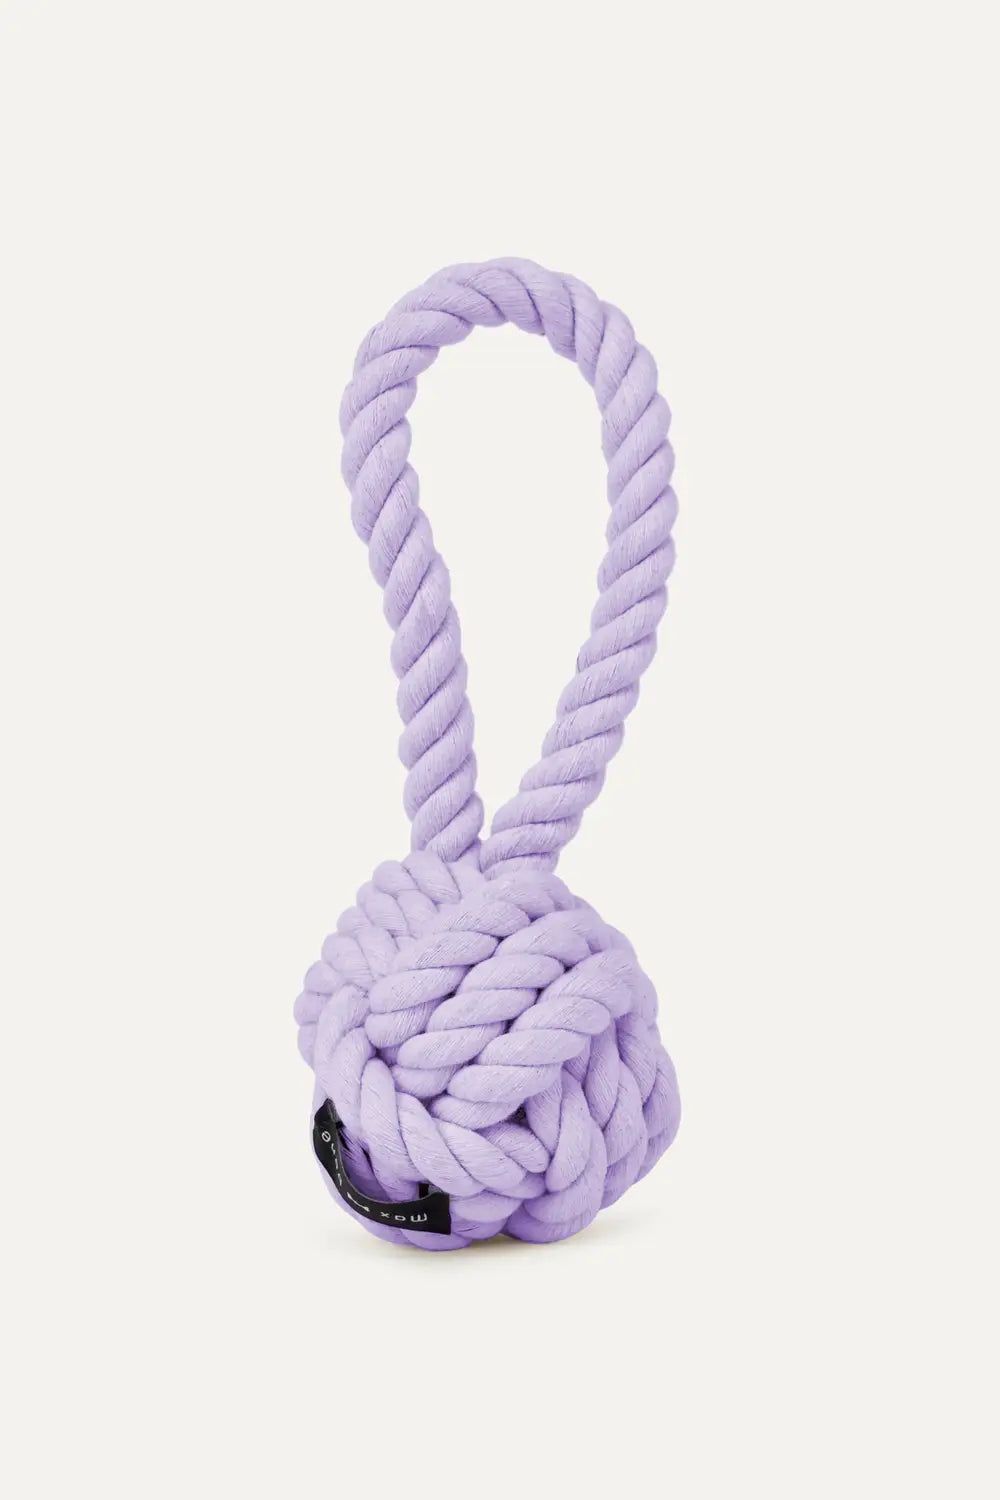 Lavender Rope toy